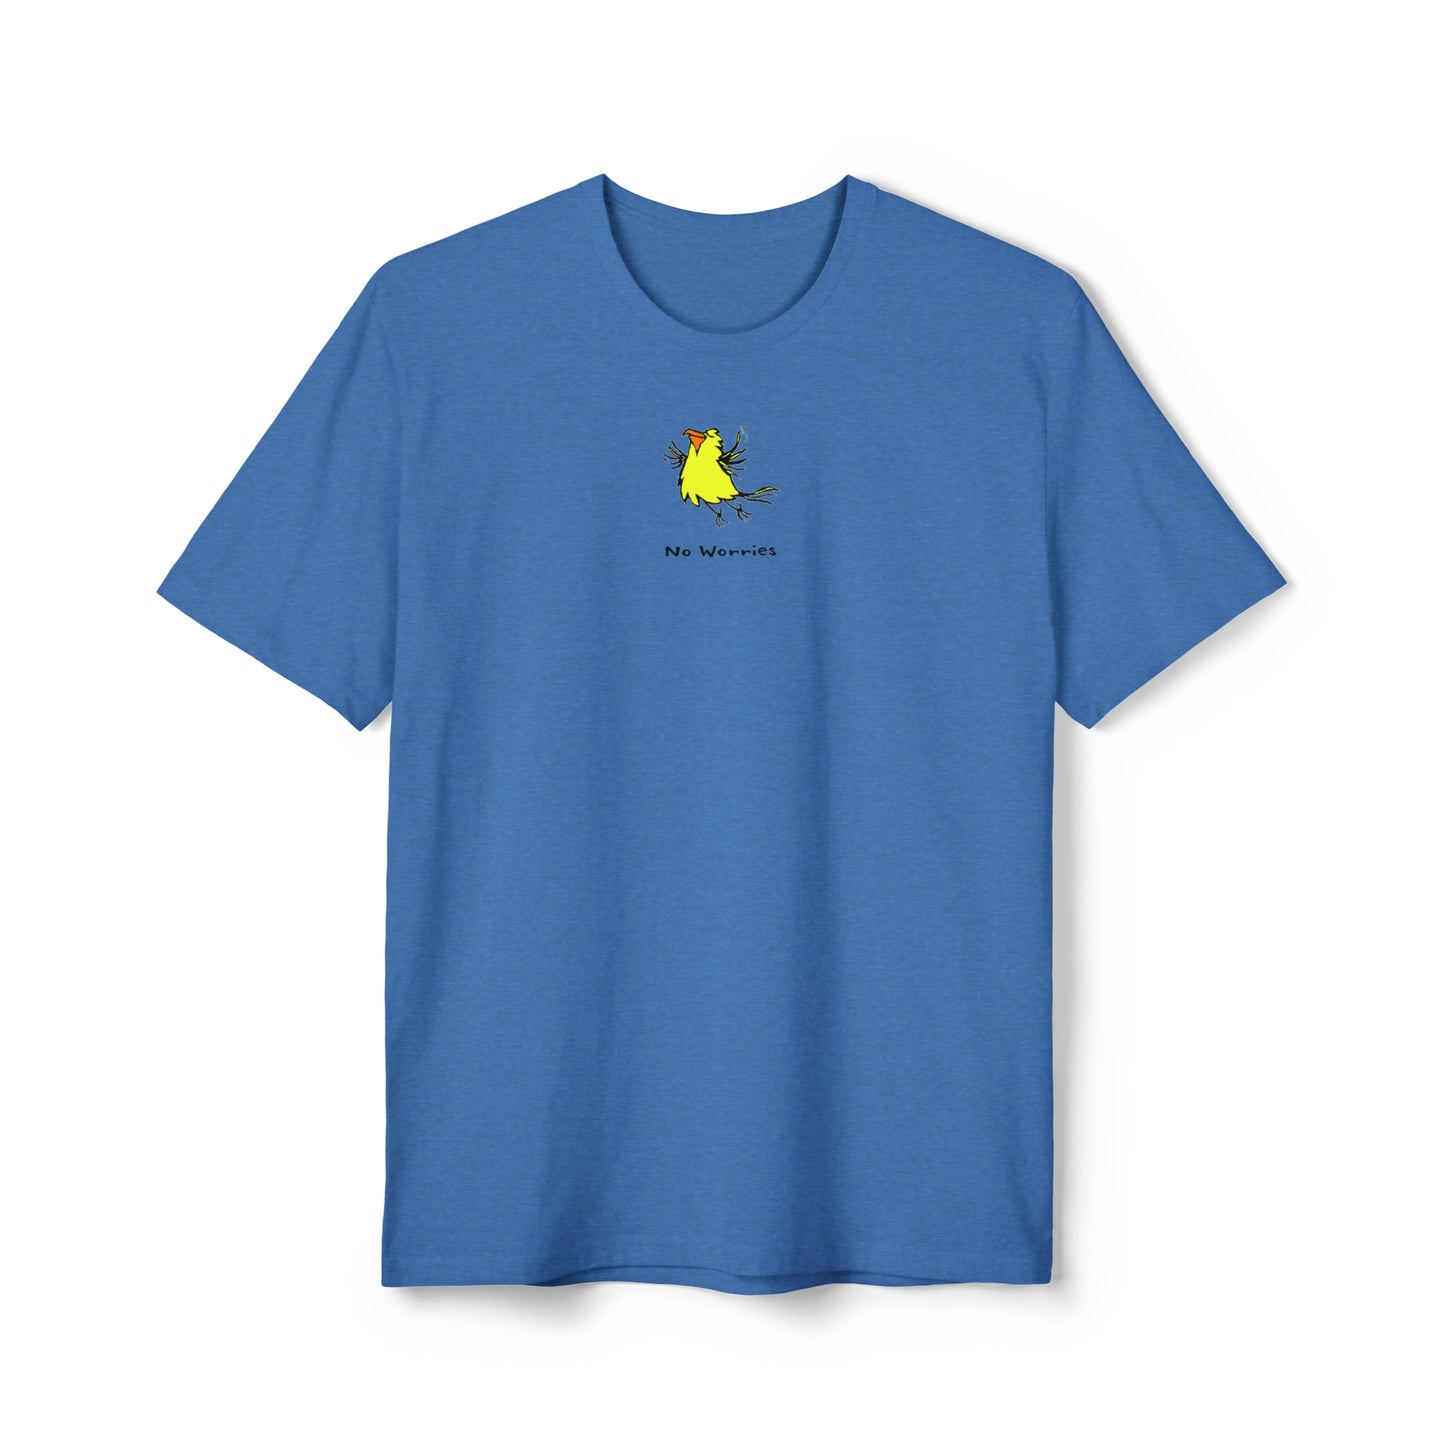 Yellow flying bird with orange beak on blue heather color recycled unisex men's t-shirt. Text under image says No Worries